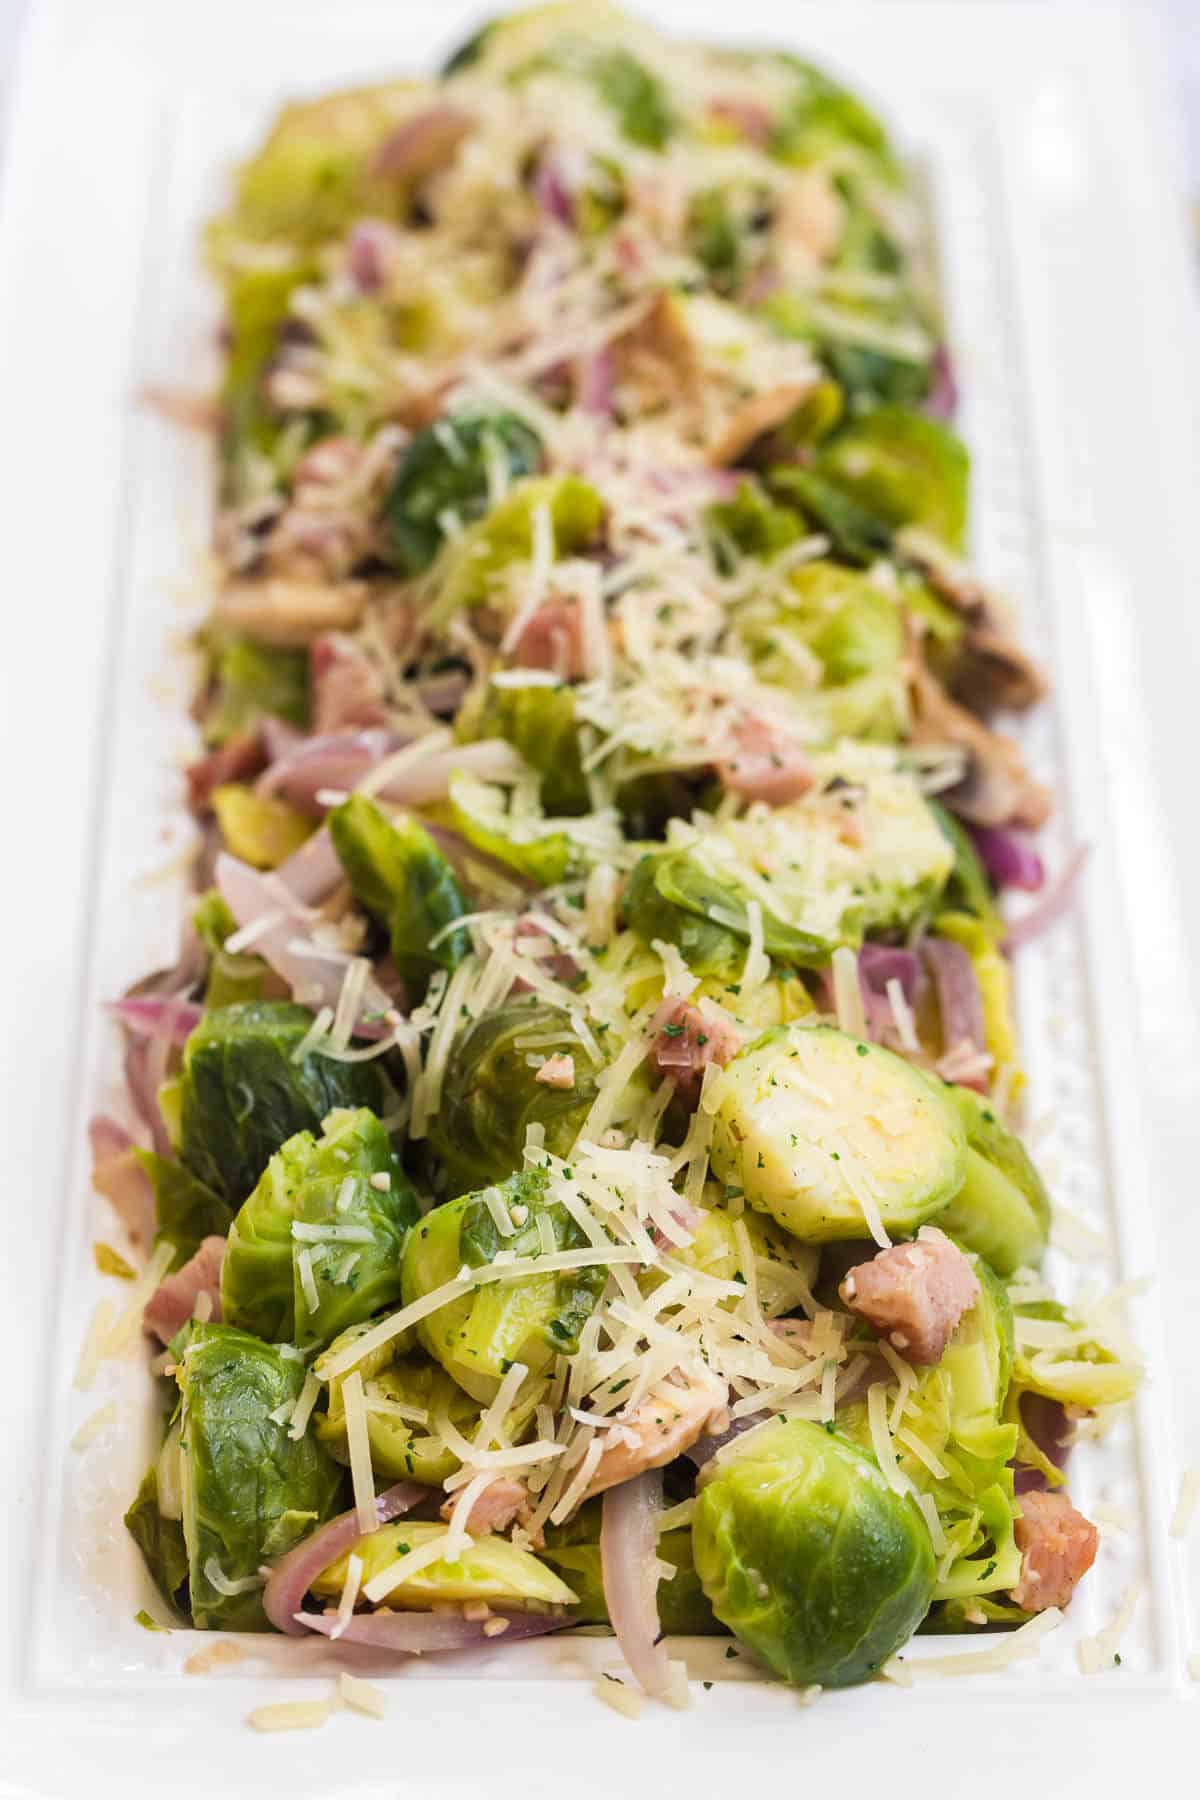 Brussel sprouts on a platter.